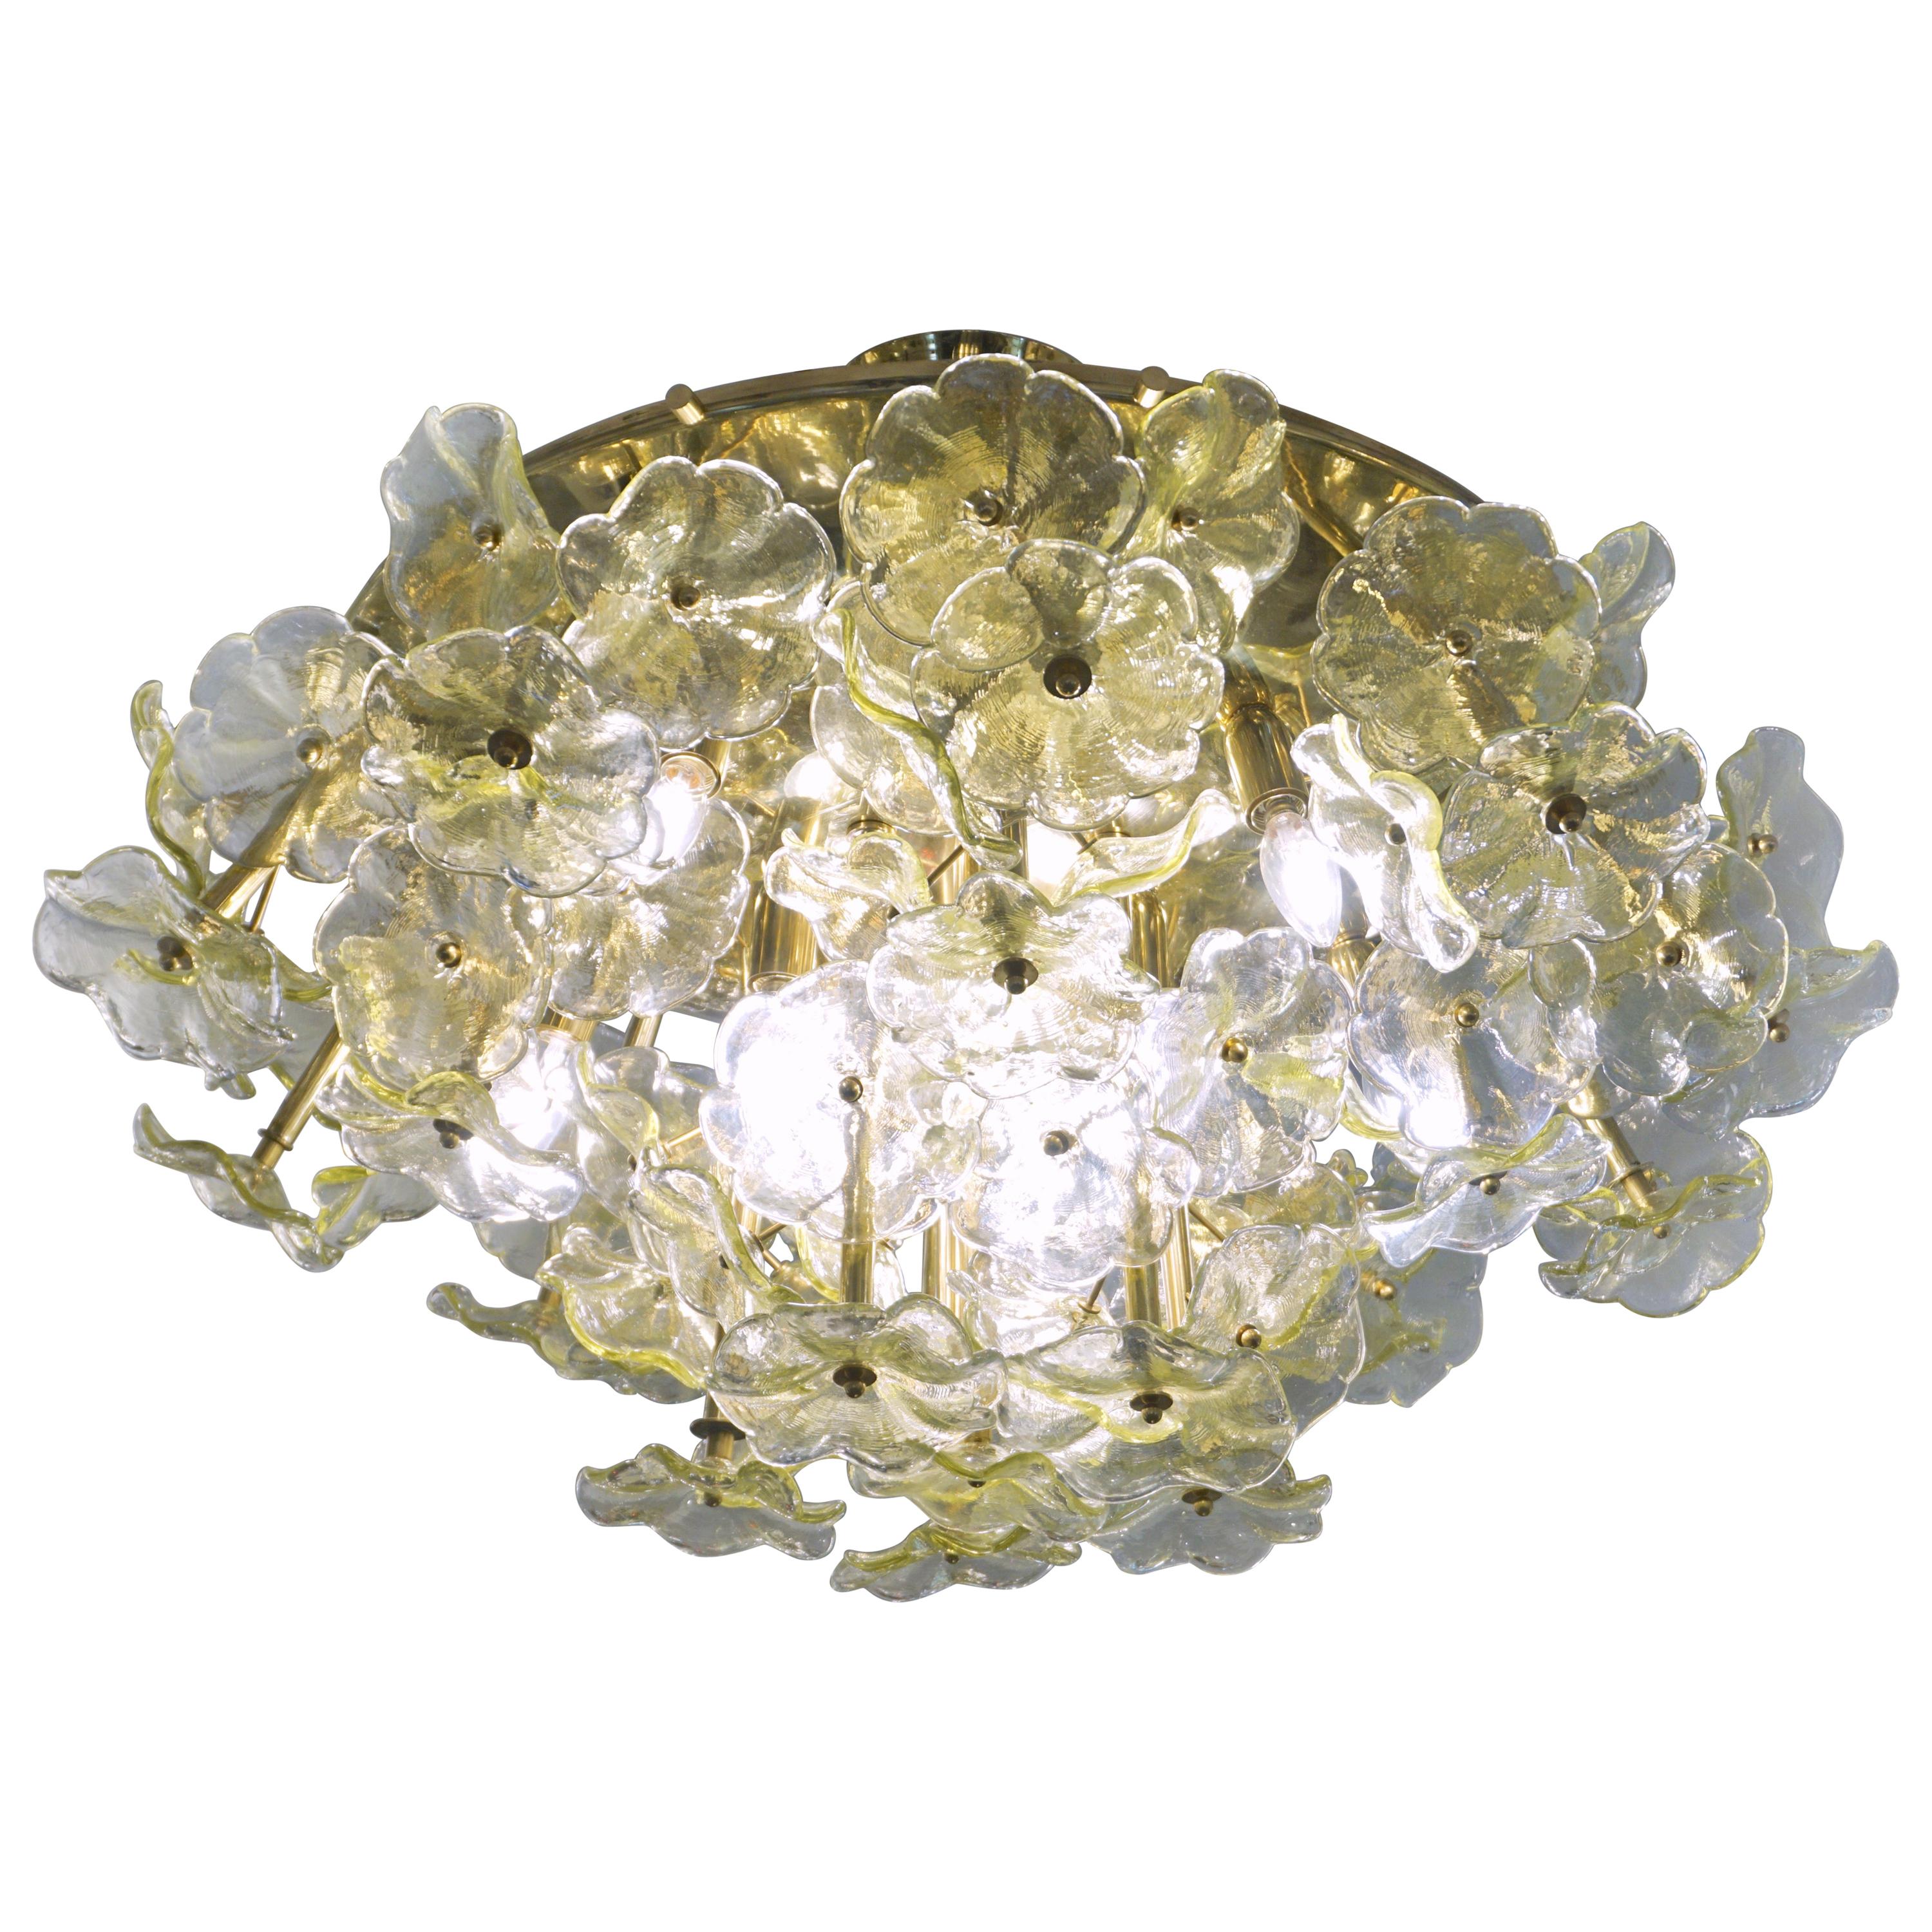 1970s Italian one-of-a-kind amber yellow Murano glass flower chandelier, organic modern design entirely handcrafted in Italy, the round convex structure in brass that can be mounted nearly flush is artistically and uniquely decorated with a cluster